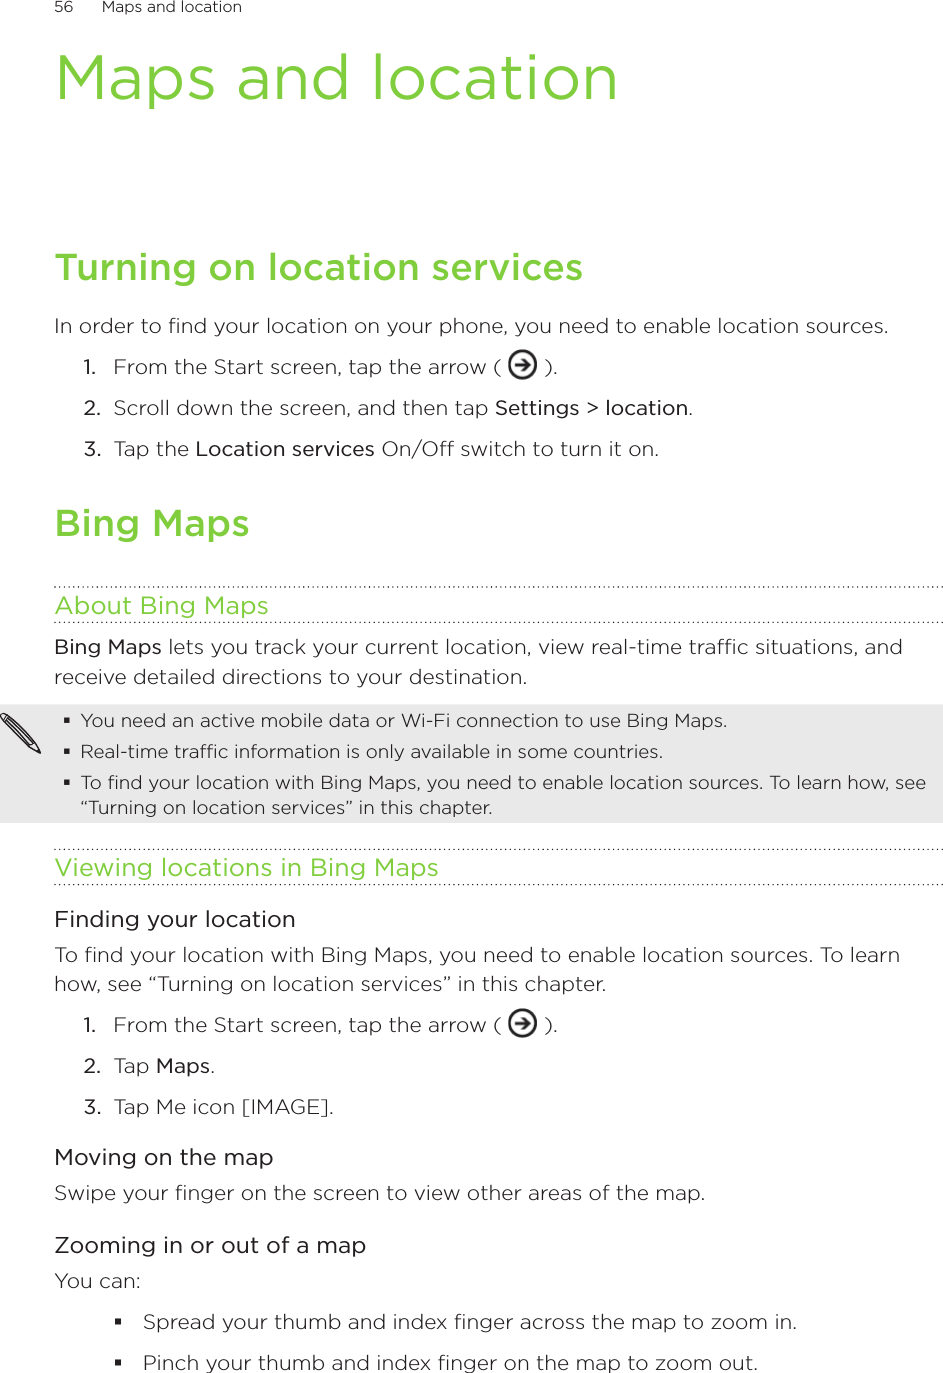 56      Maps and location      Maps and locationTurning on location servicesIn order to find your location on your phone, you need to enable location sources.From the Start screen, tap the arrow (   ).Scroll down the screen, and then tap Settings &gt; location.Tap the Location services On/Off switch to turn it on. Bing MapsAbout Bing MapsBing Maps lets you track your current location, view real-time traffic situations, and receive detailed directions to your destination. You need an active mobile data or Wi-Fi connection to use Bing Maps.Real-time traffic information is only available in some countries.To find your location with Bing Maps, you need to enable location sources. To learn how, see “Turning on location services” in this chapter.Viewing locations in Bing MapsFinding your locationTo find your location with Bing Maps, you need to enable location sources. To learn how, see “Turning on location services” in this chapter.From the Start screen, tap the arrow (   ).Tap Maps.Tap Me icon [IMAGE].Moving on the mapSwipe your finger on the screen to view other areas of the map.Zooming in or out of a mapYou can:Spread your thumb and index finger across the map to zoom in.Pinch your thumb and index finger on the map to zoom out.1.2.3.1.2.3.